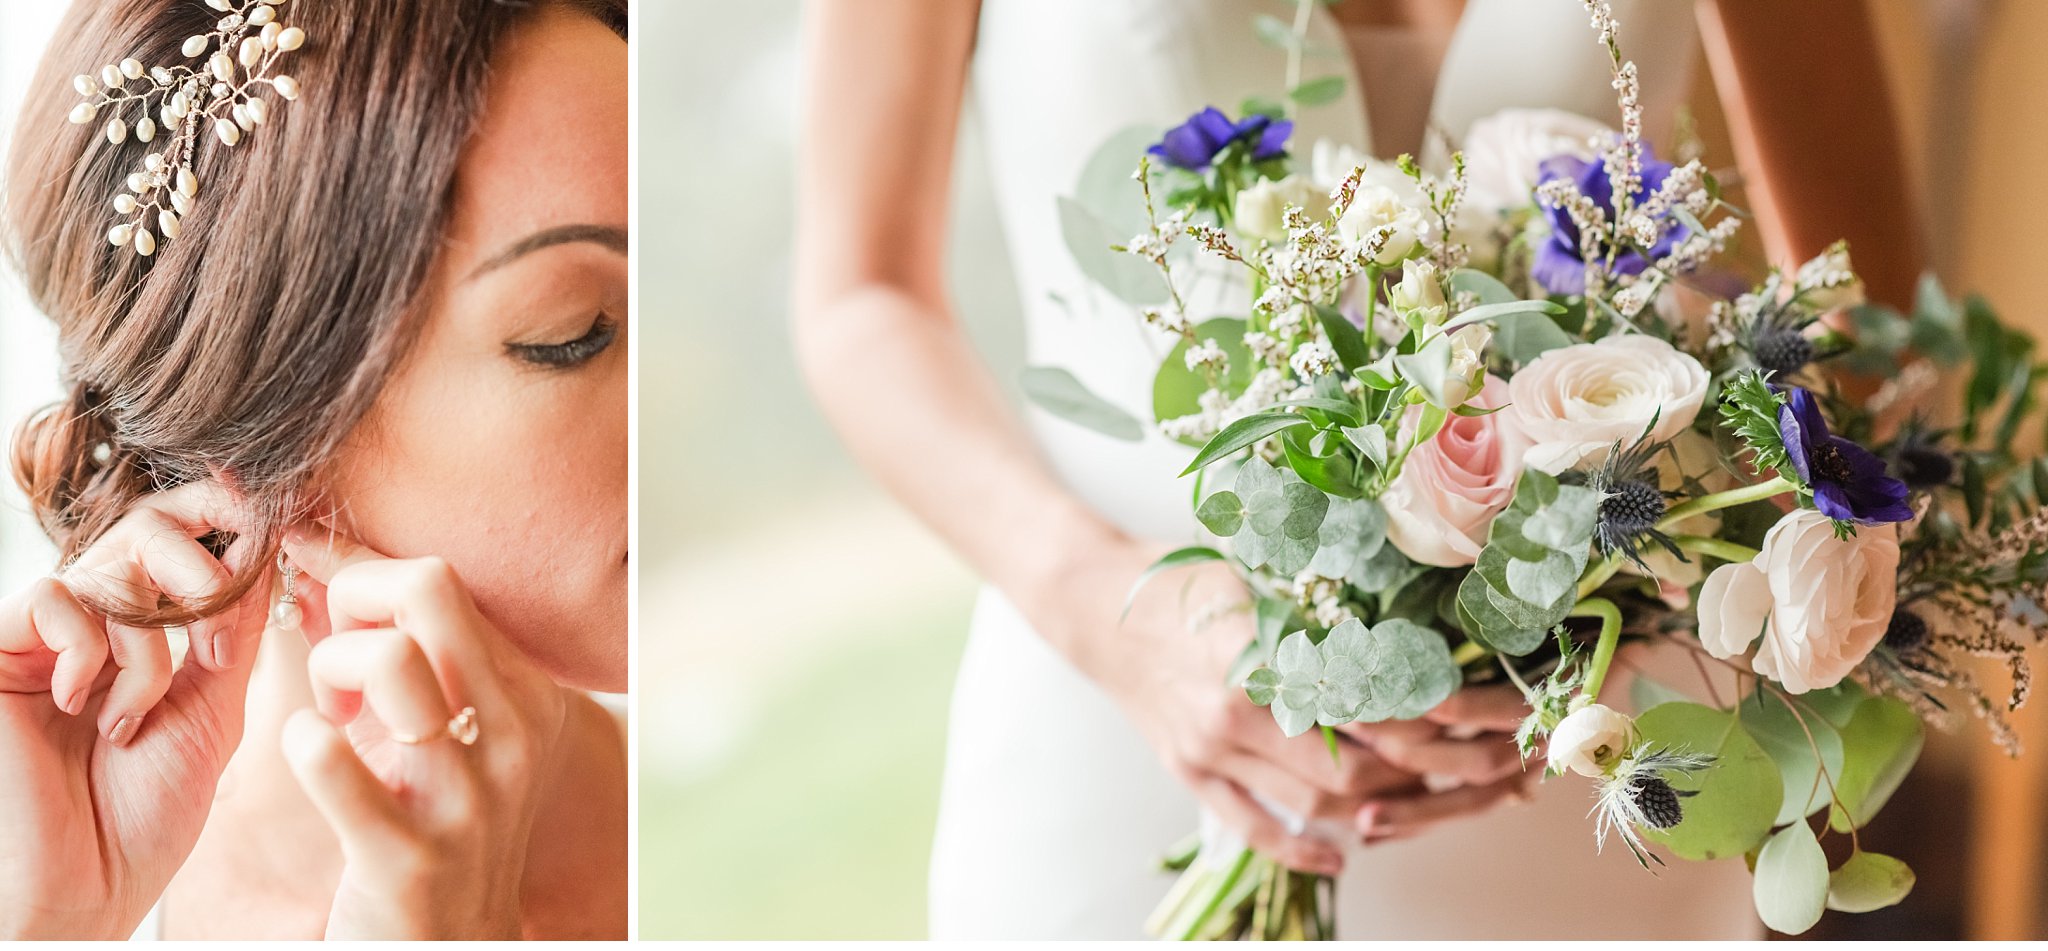 bride putting in her earring; bride holding her bouquet